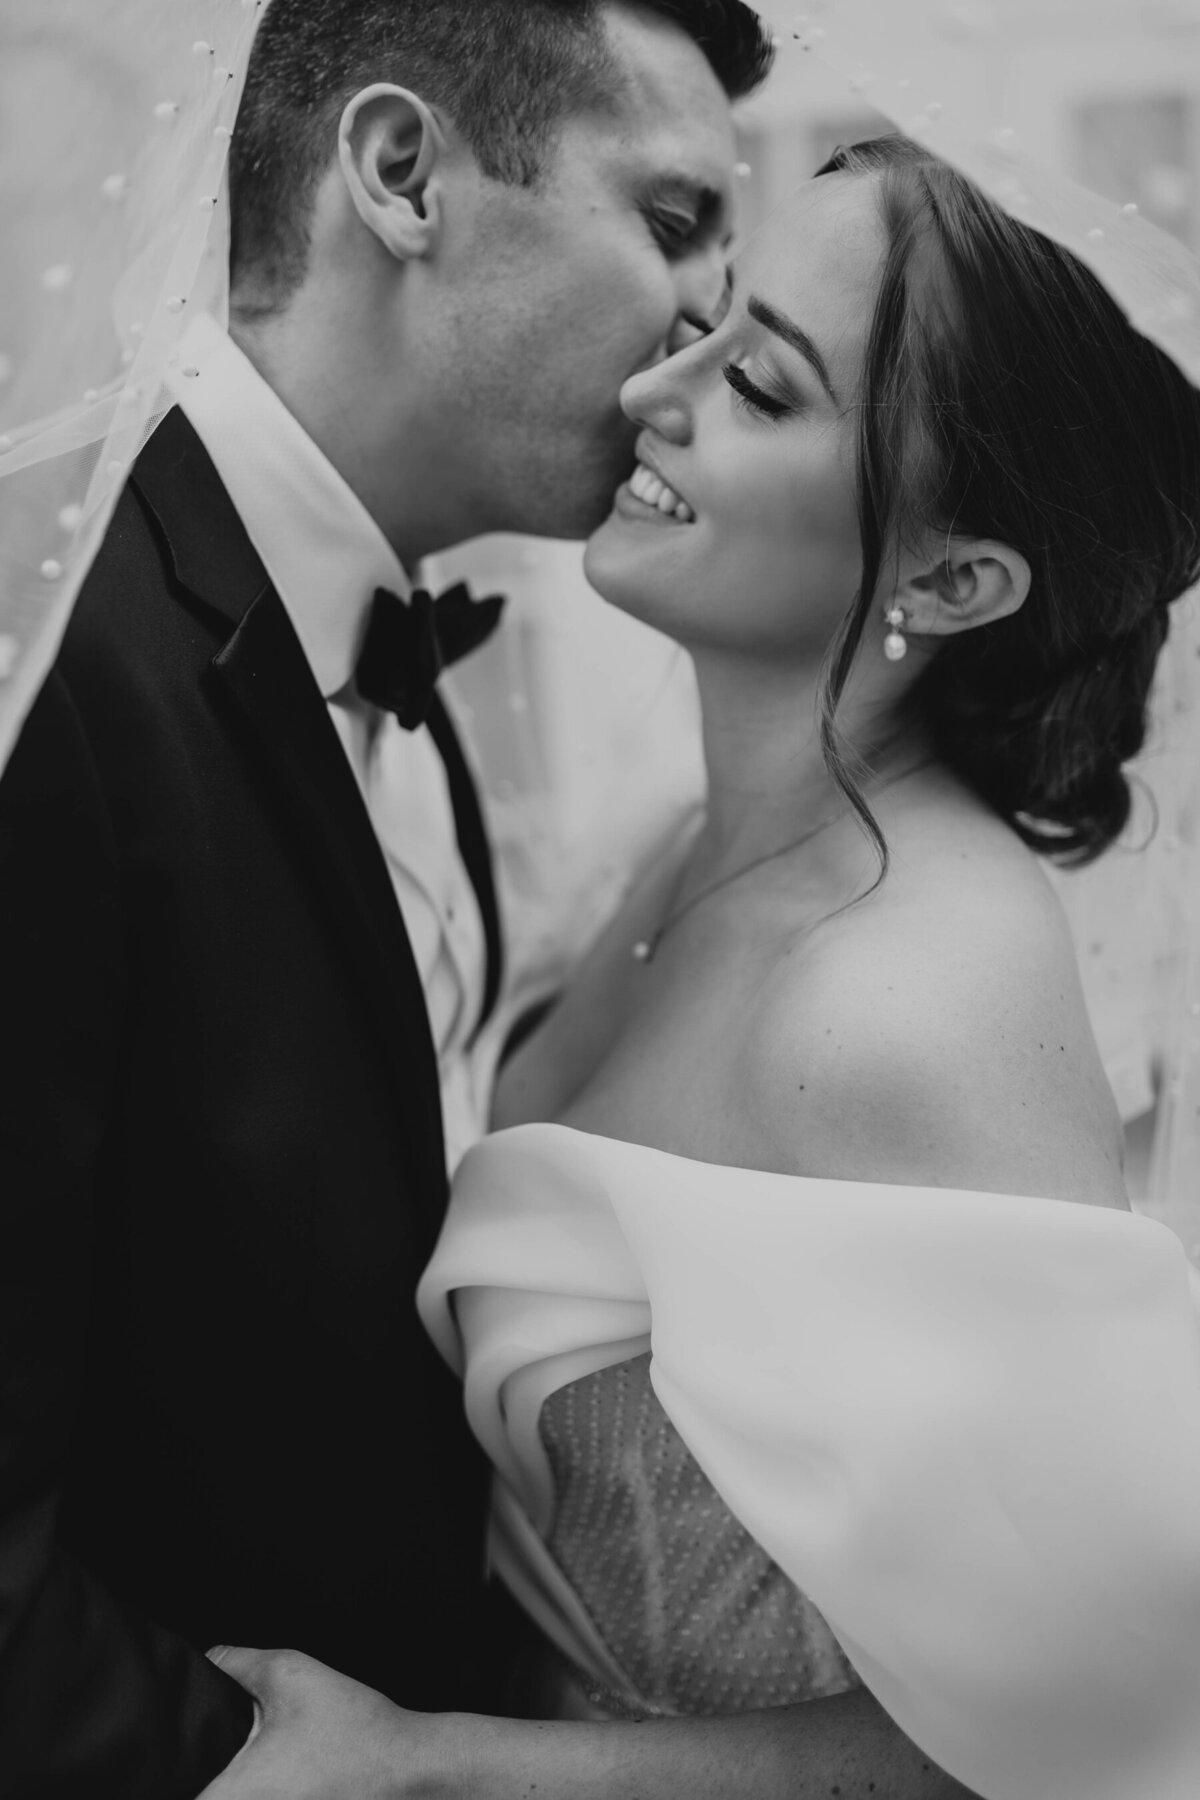 A black and white photo of the groom kissing the bride on her cheek.